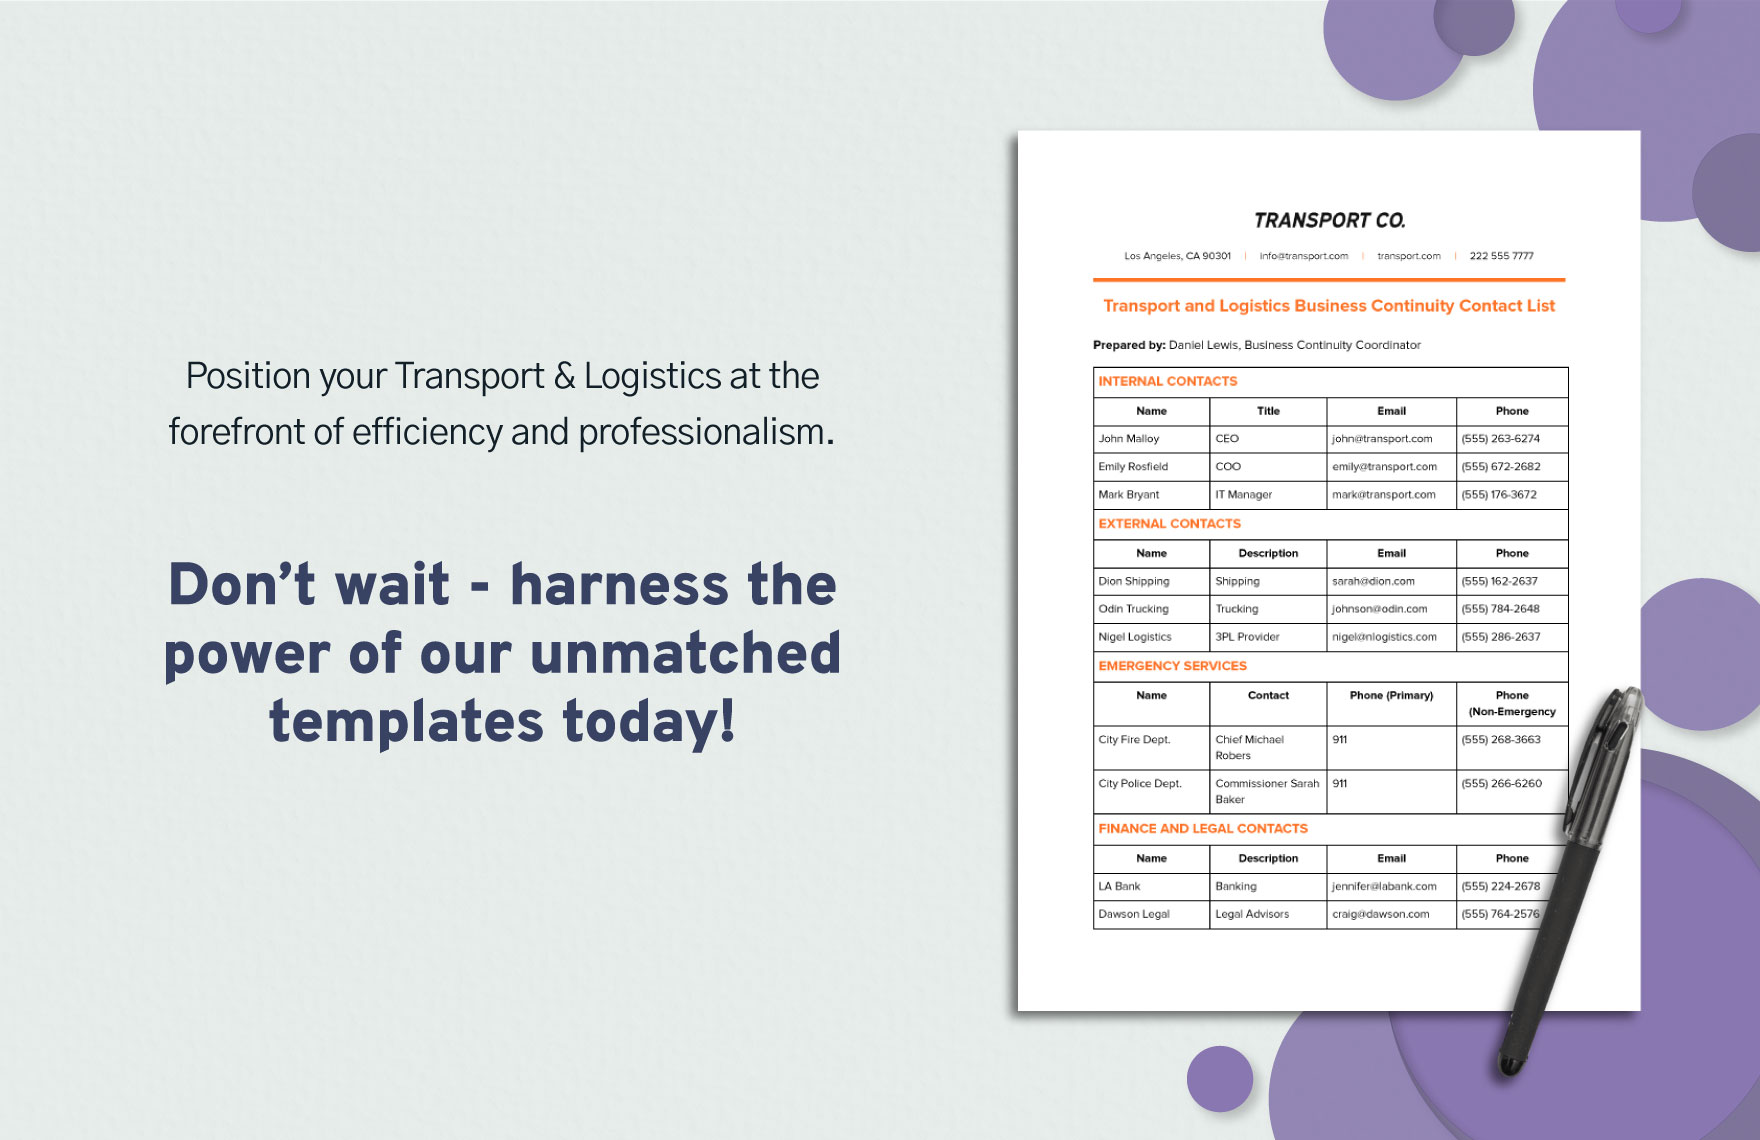 Transport and Logistics Business Continuity Contact List Template